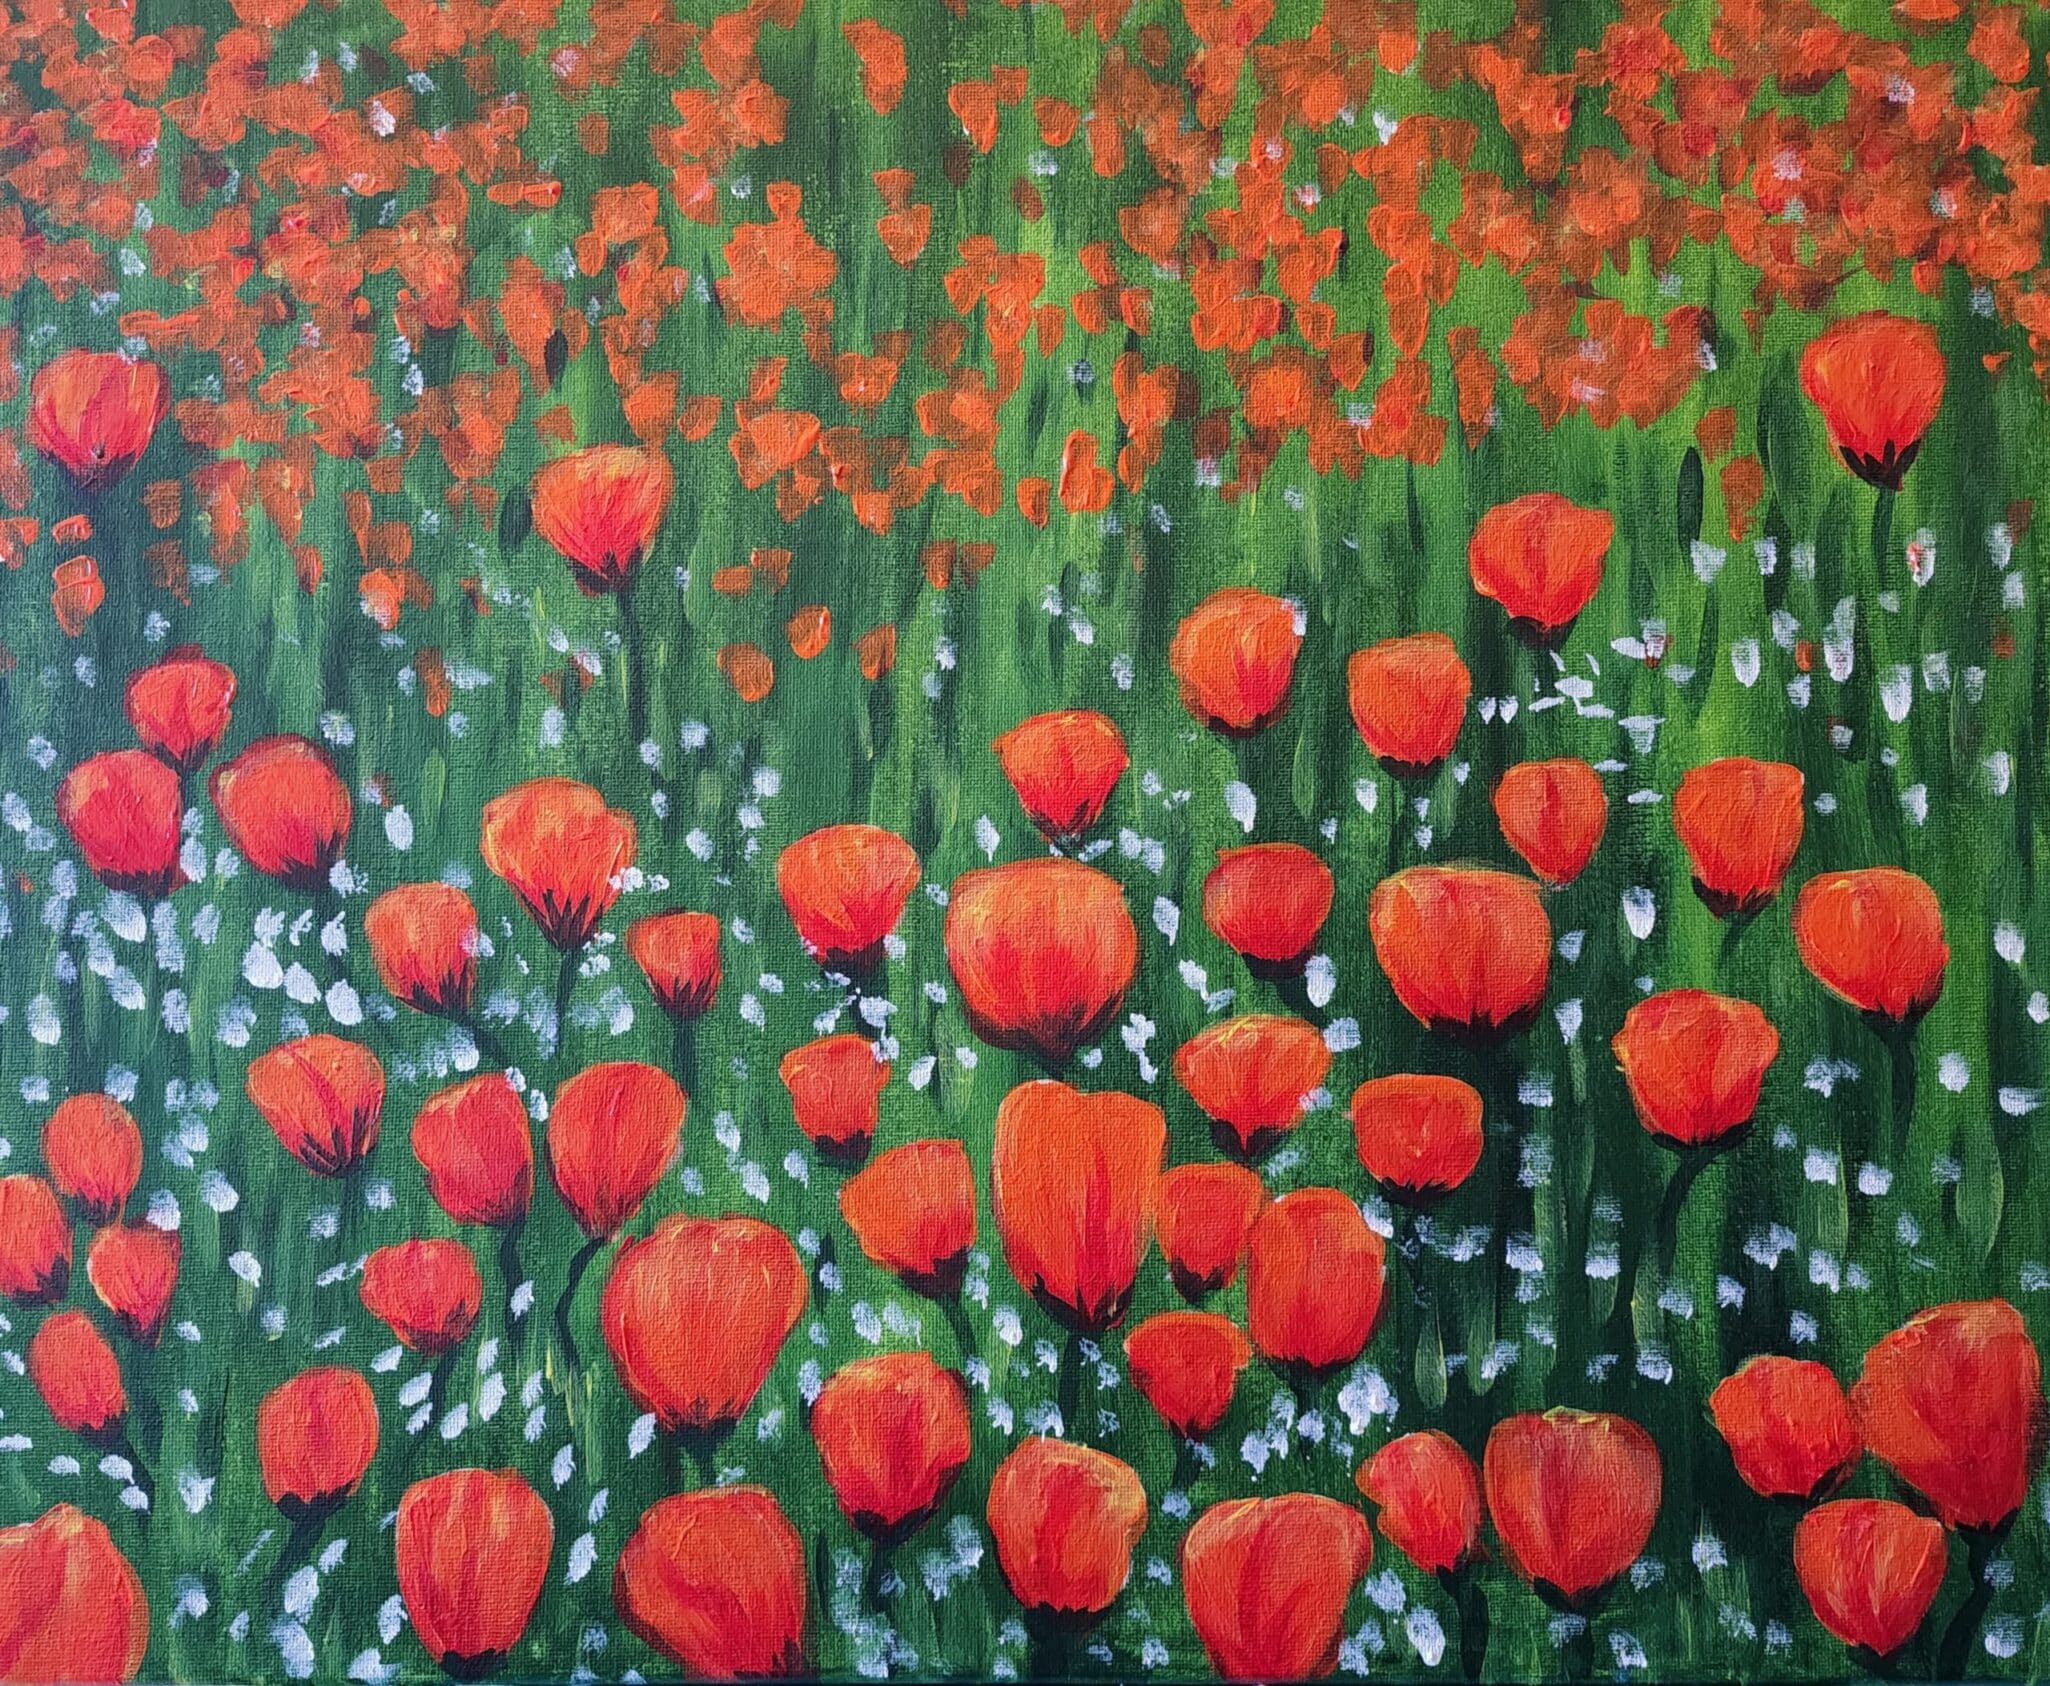 Image of painting called Poppy Fields sip and paint painting at Brick and Barrel in Lincoln